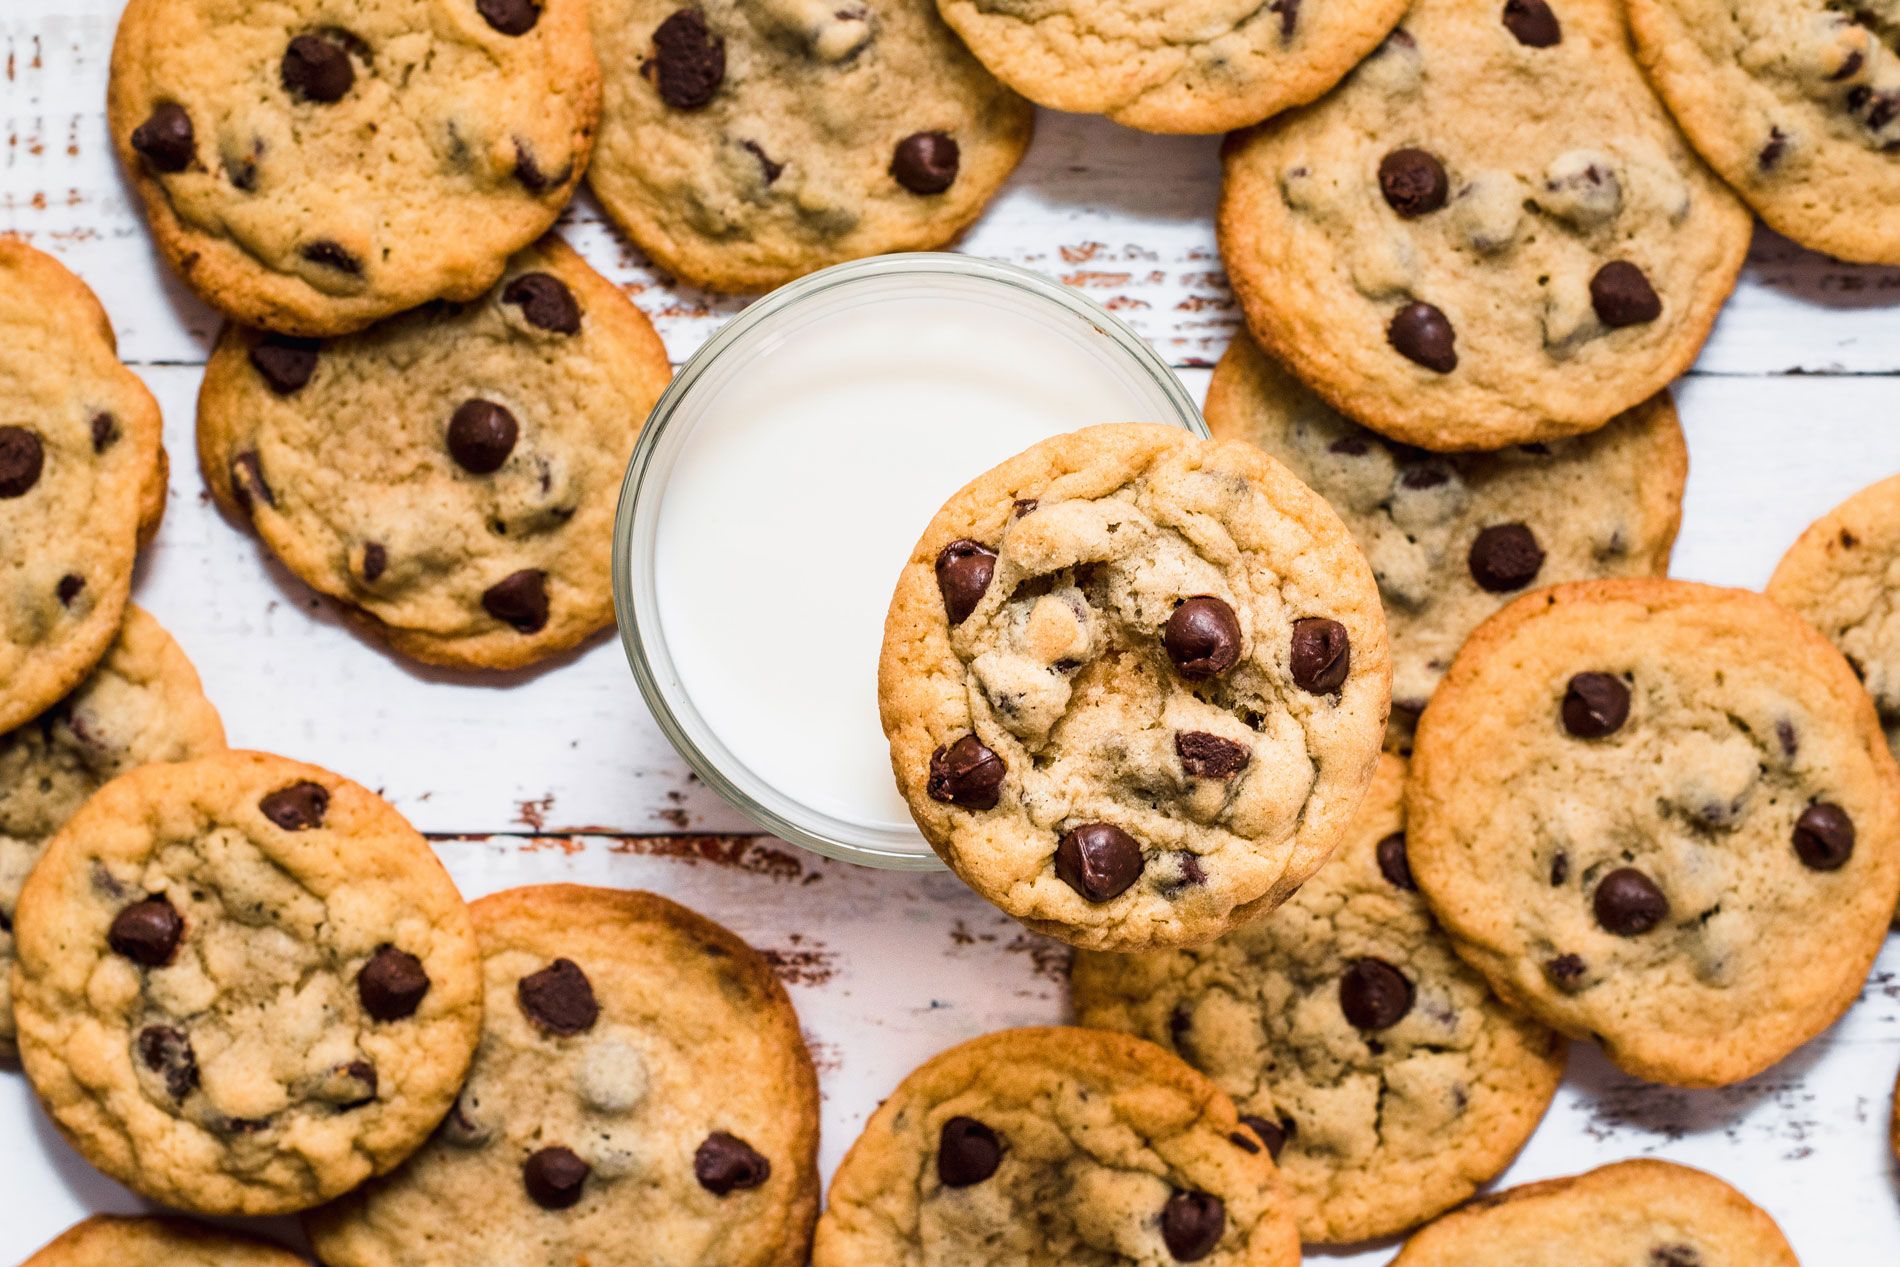 The Best Additions to Toll House Chocolate Chip Cookies